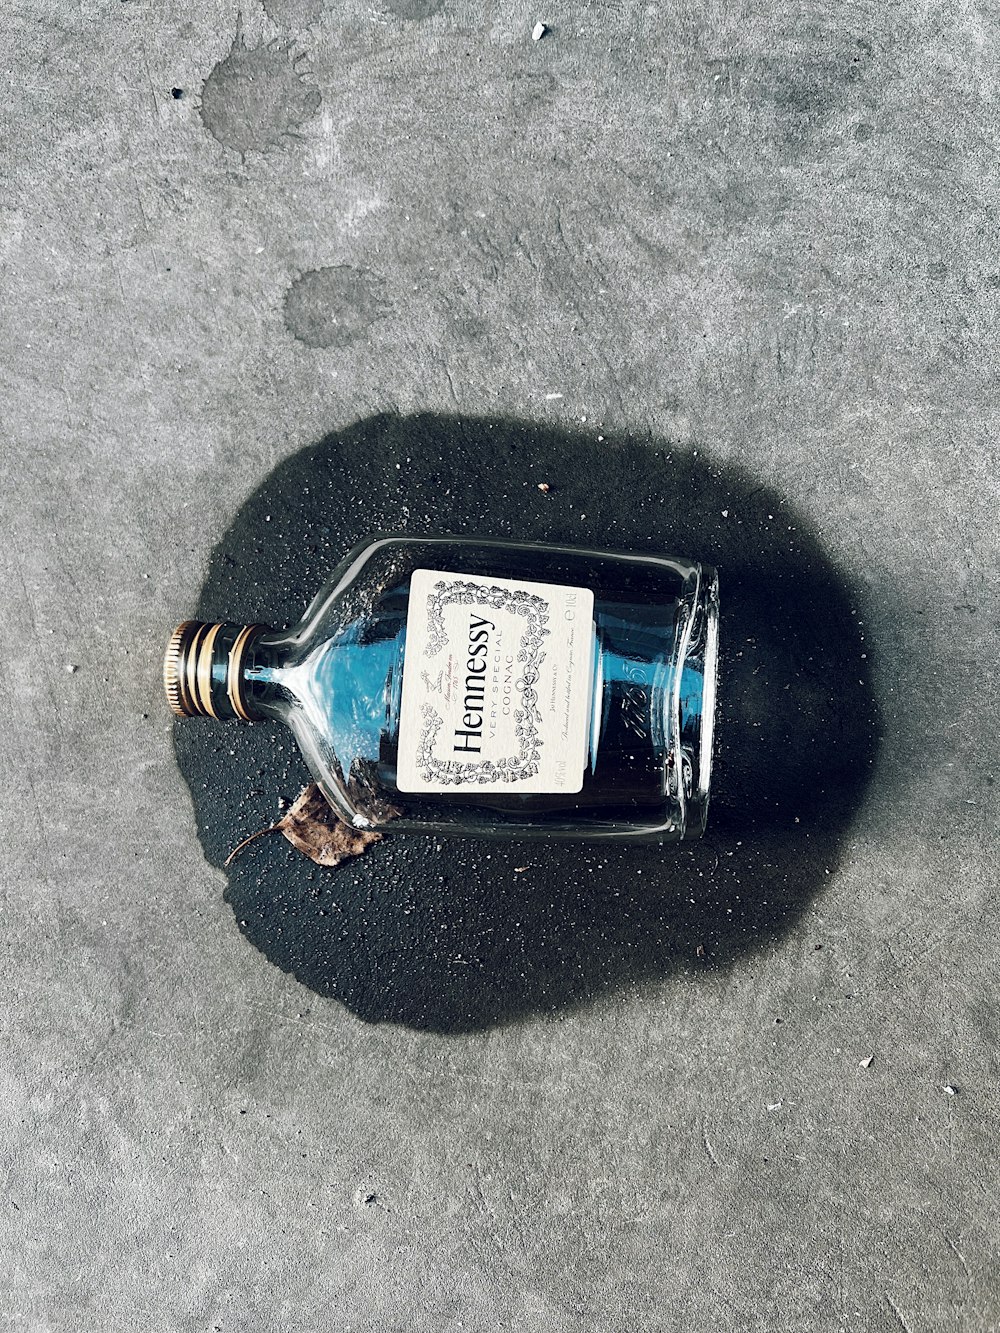 a bottle with a label on it sitting on the ground